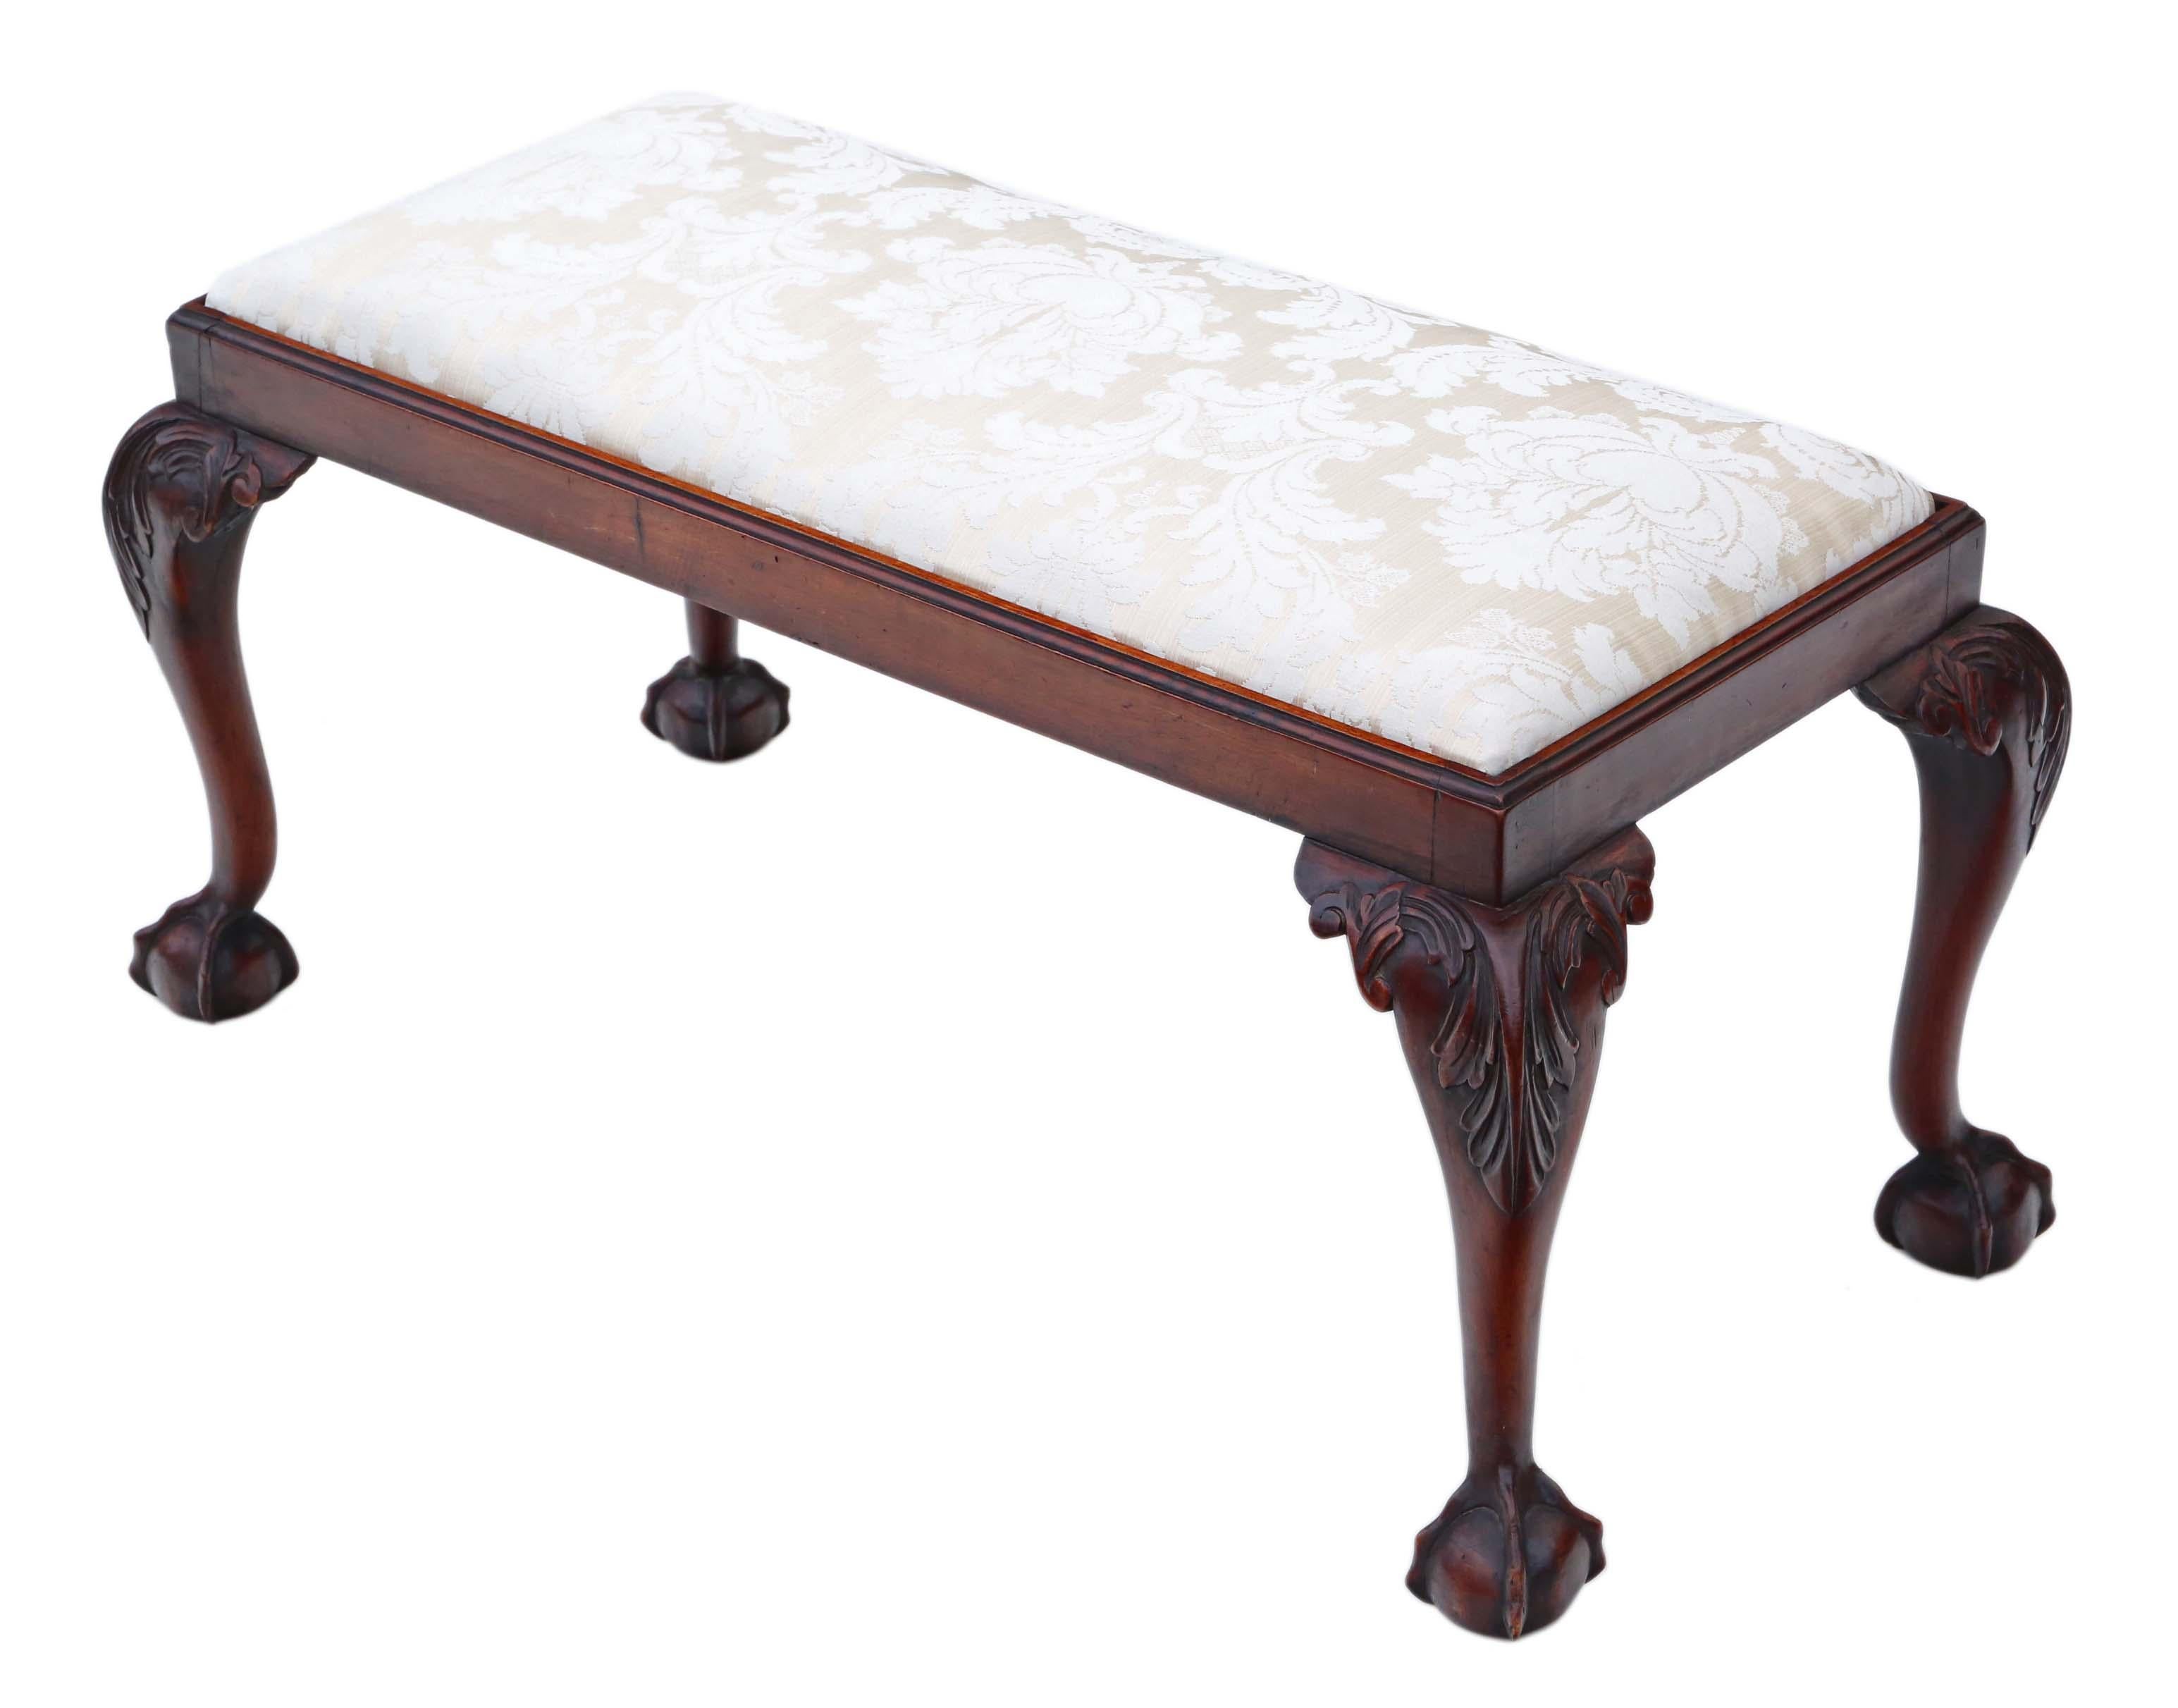 Antique fine quality 19th century carved mahogany double stool or window seat. A beautiful statement piece of fine quality.

Solid and strong, with no loose joints or woodworm. This piece has been reupholstered.

Would look great in the right